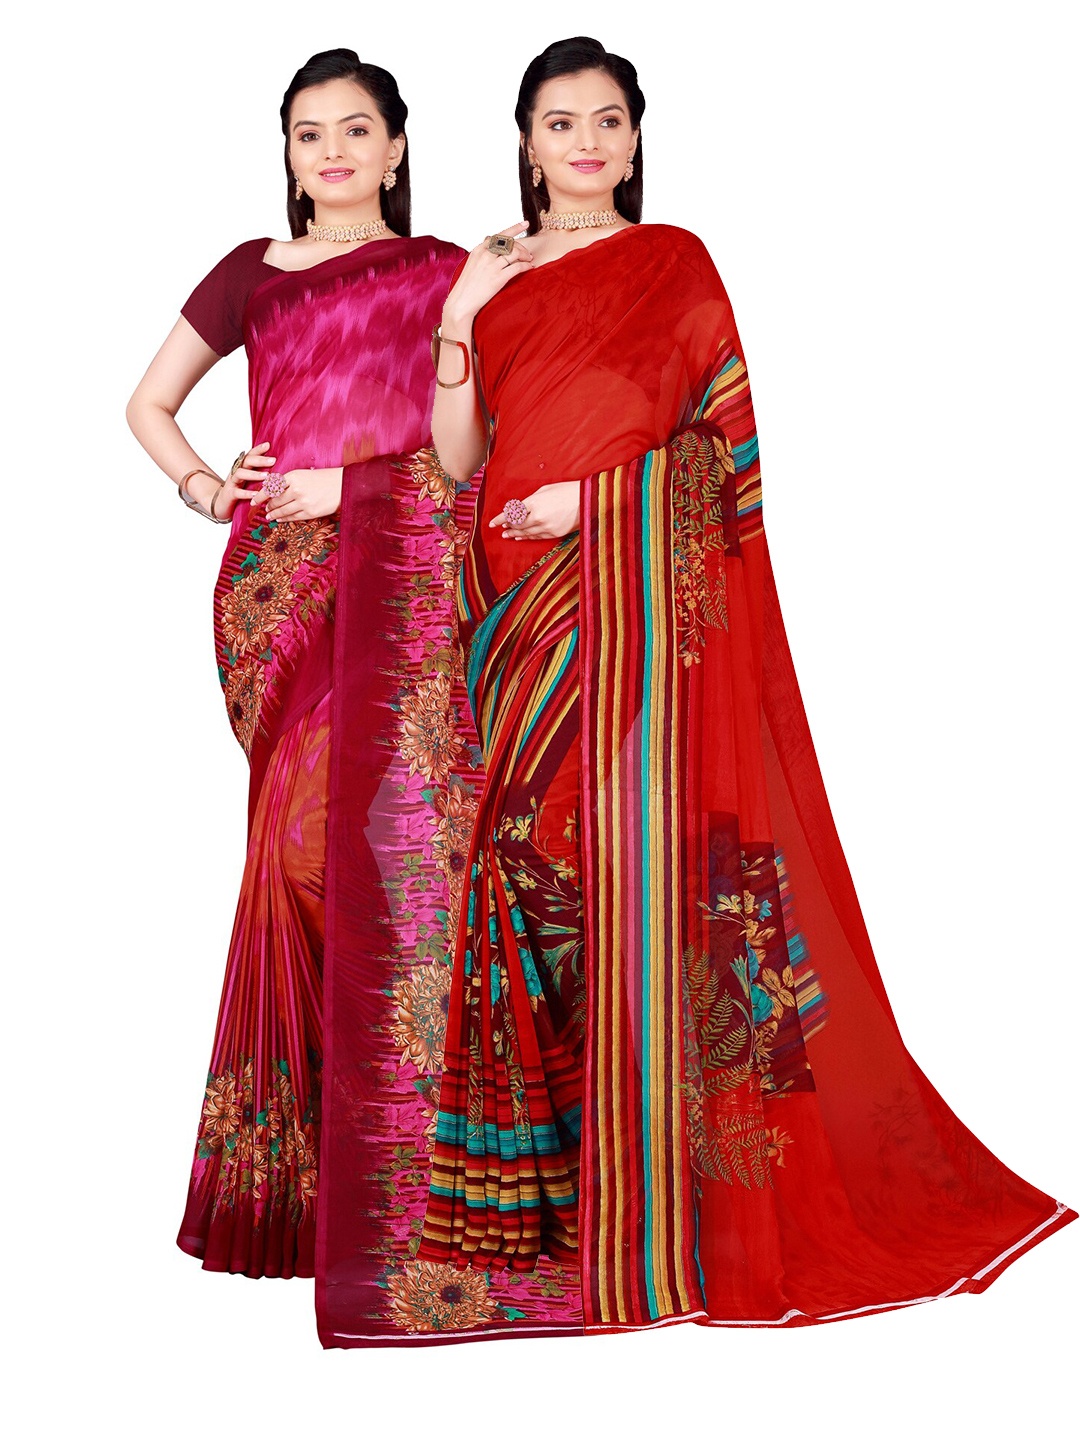 

Florence Pack of 2 Floral Pure Georgette Saree, Red